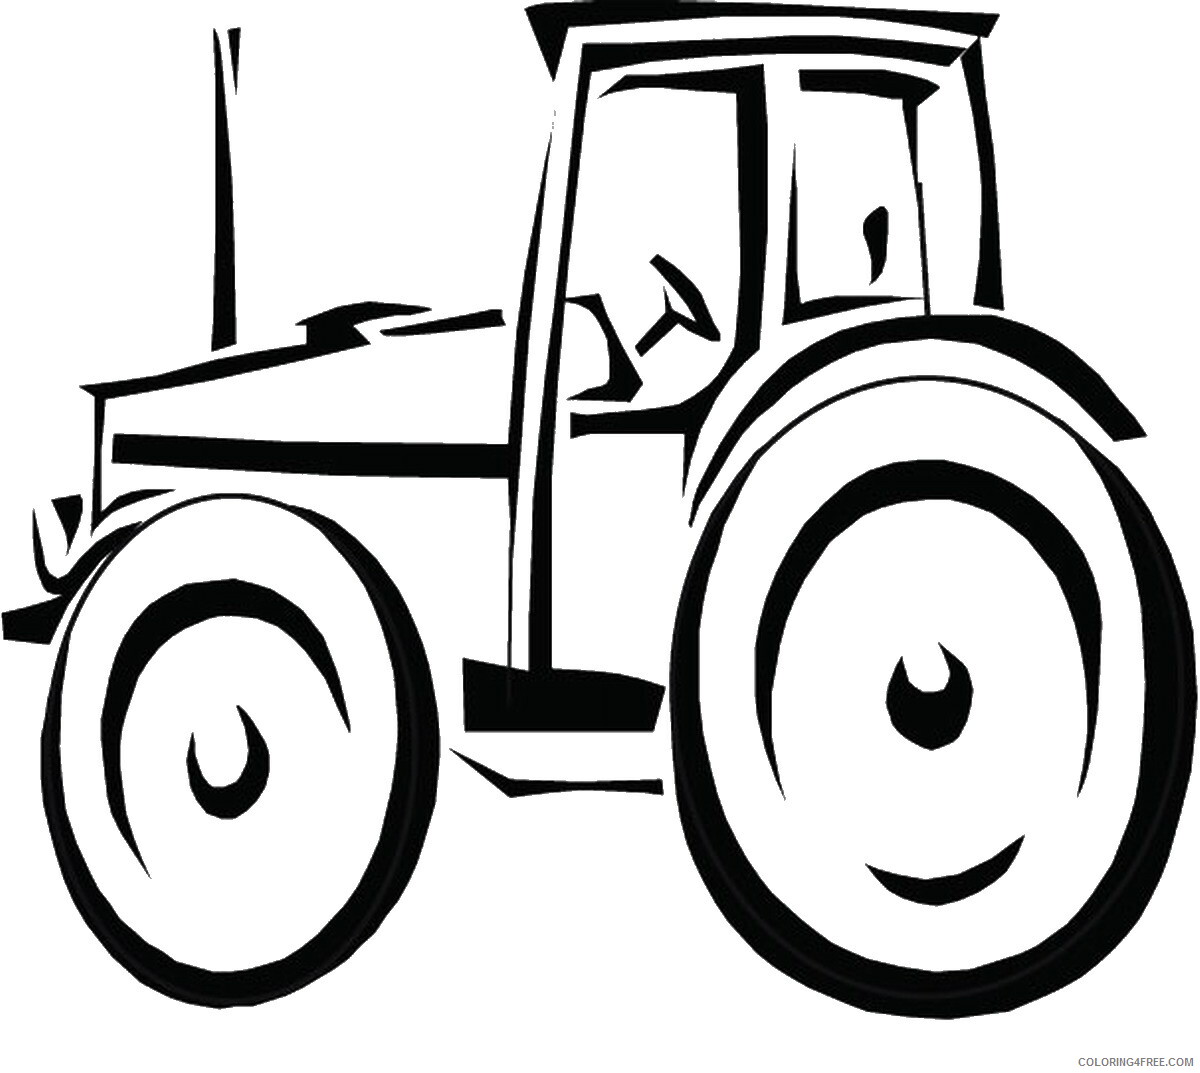 John Deere Tractor Coloring Pages for boys Printable 2020 0492 Coloring4free